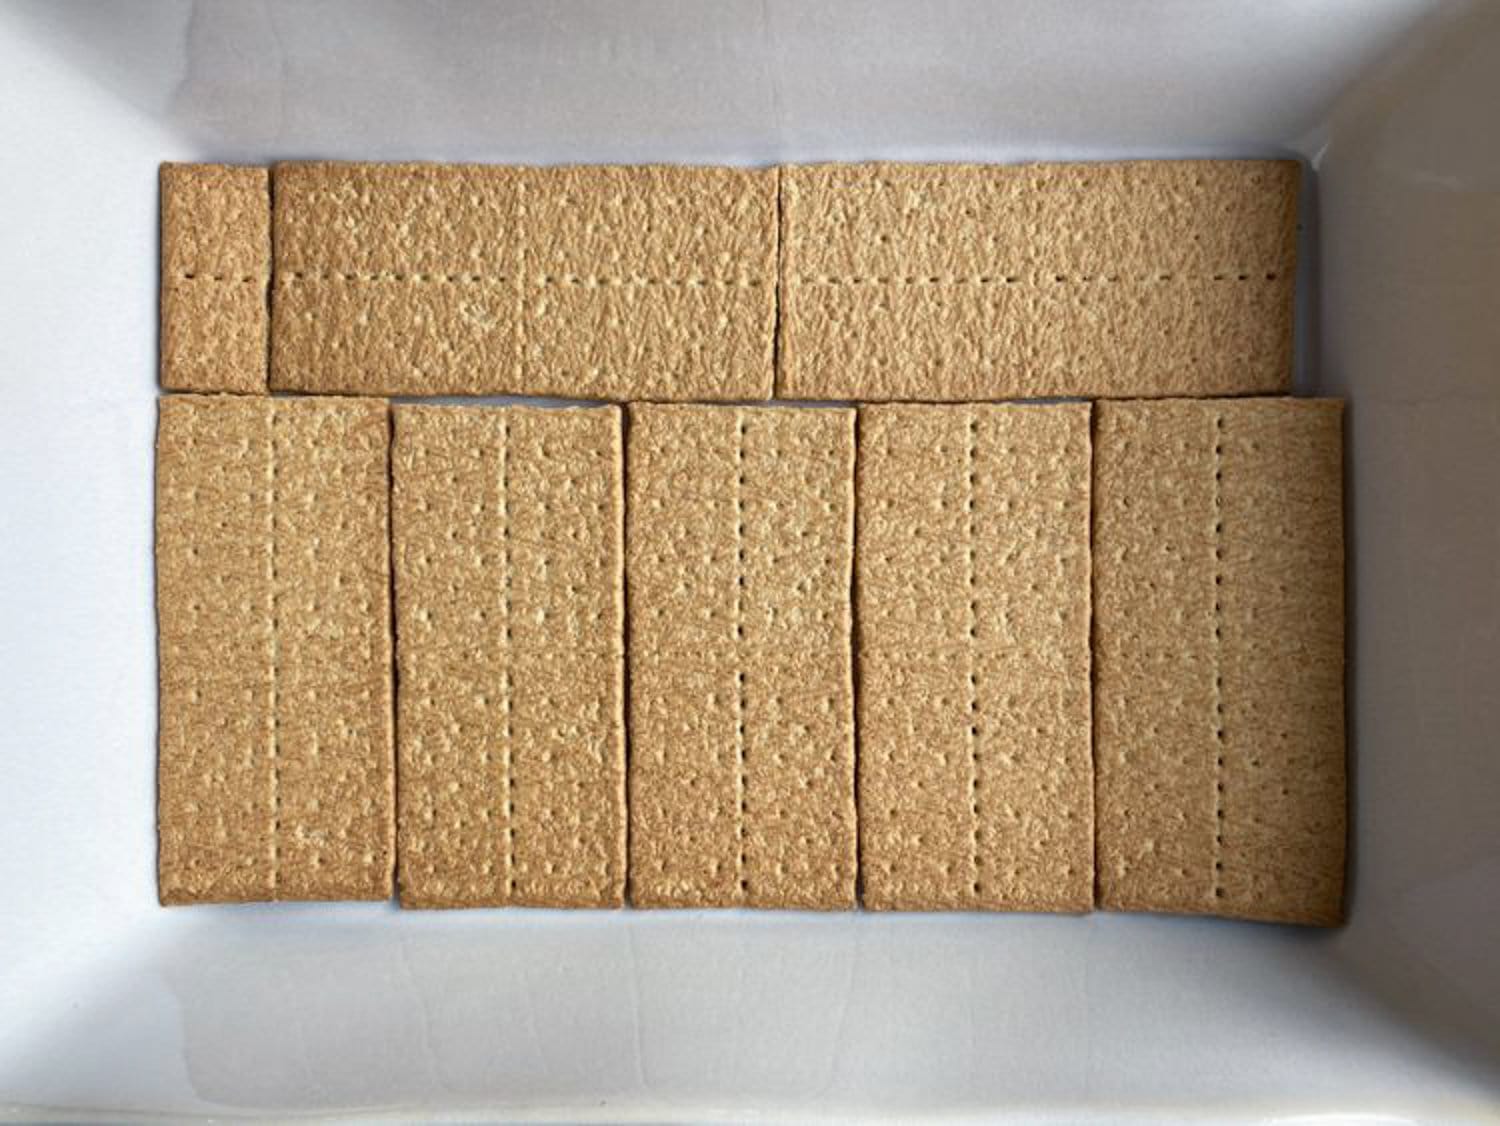 Graham crackers laid out on in a pan